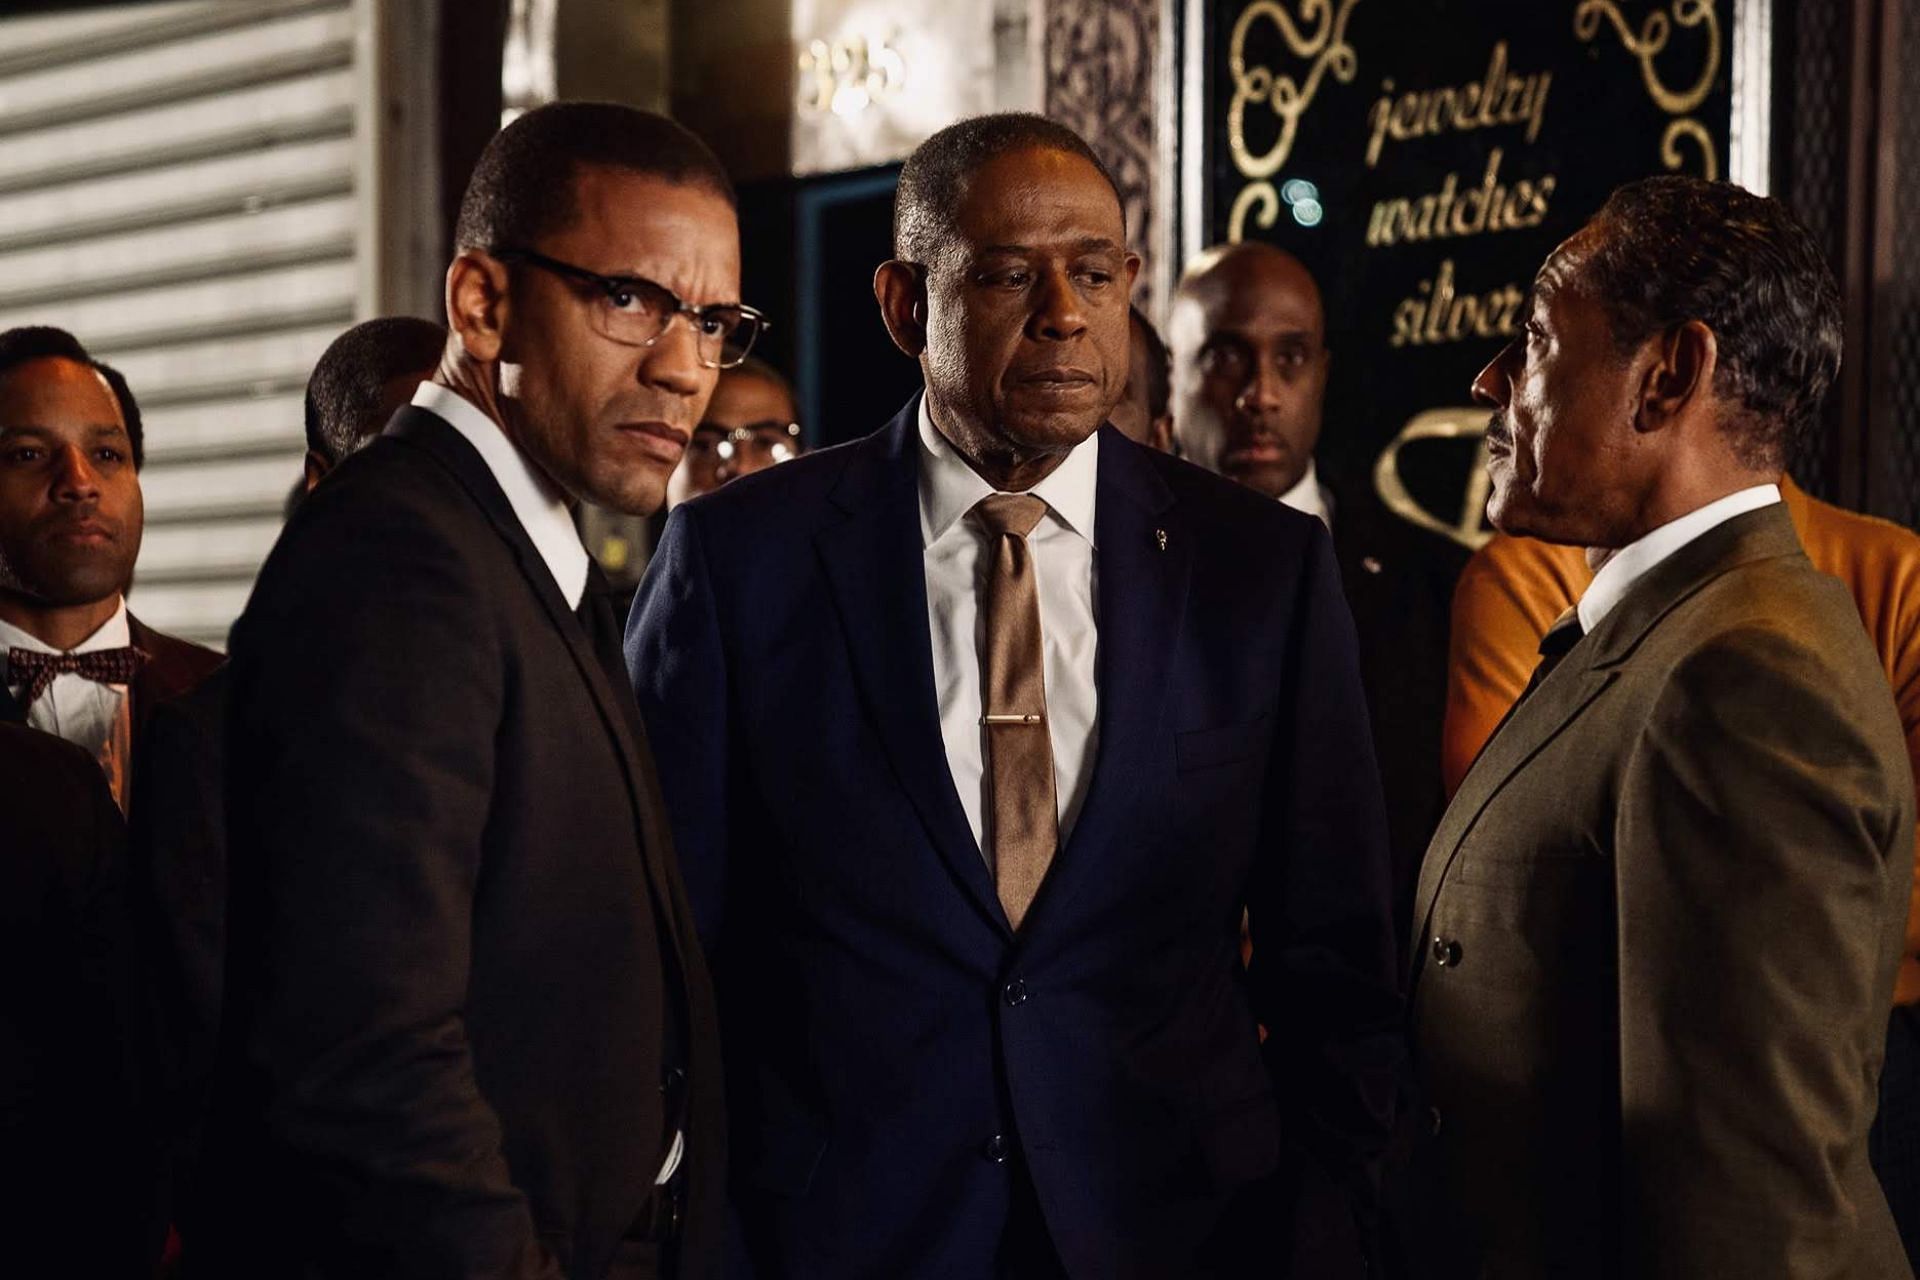 Godfather of Harlem Season 3 Episode 2: Release Date, Time & Where to Watch